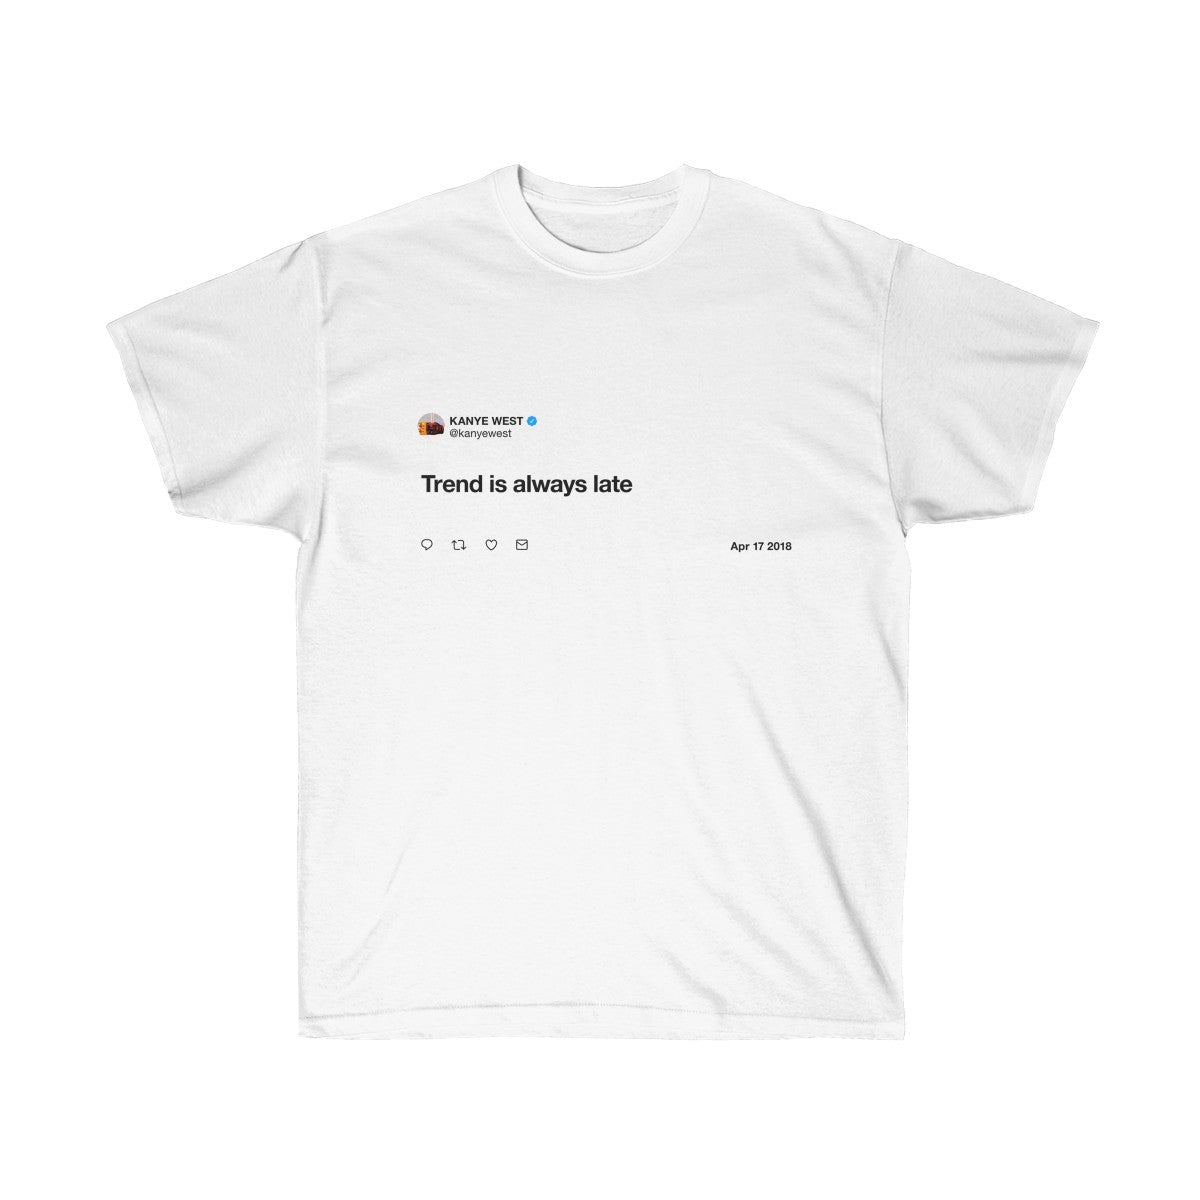 Trend is always late - Kanye West T-Shirt-White-L-Archethype